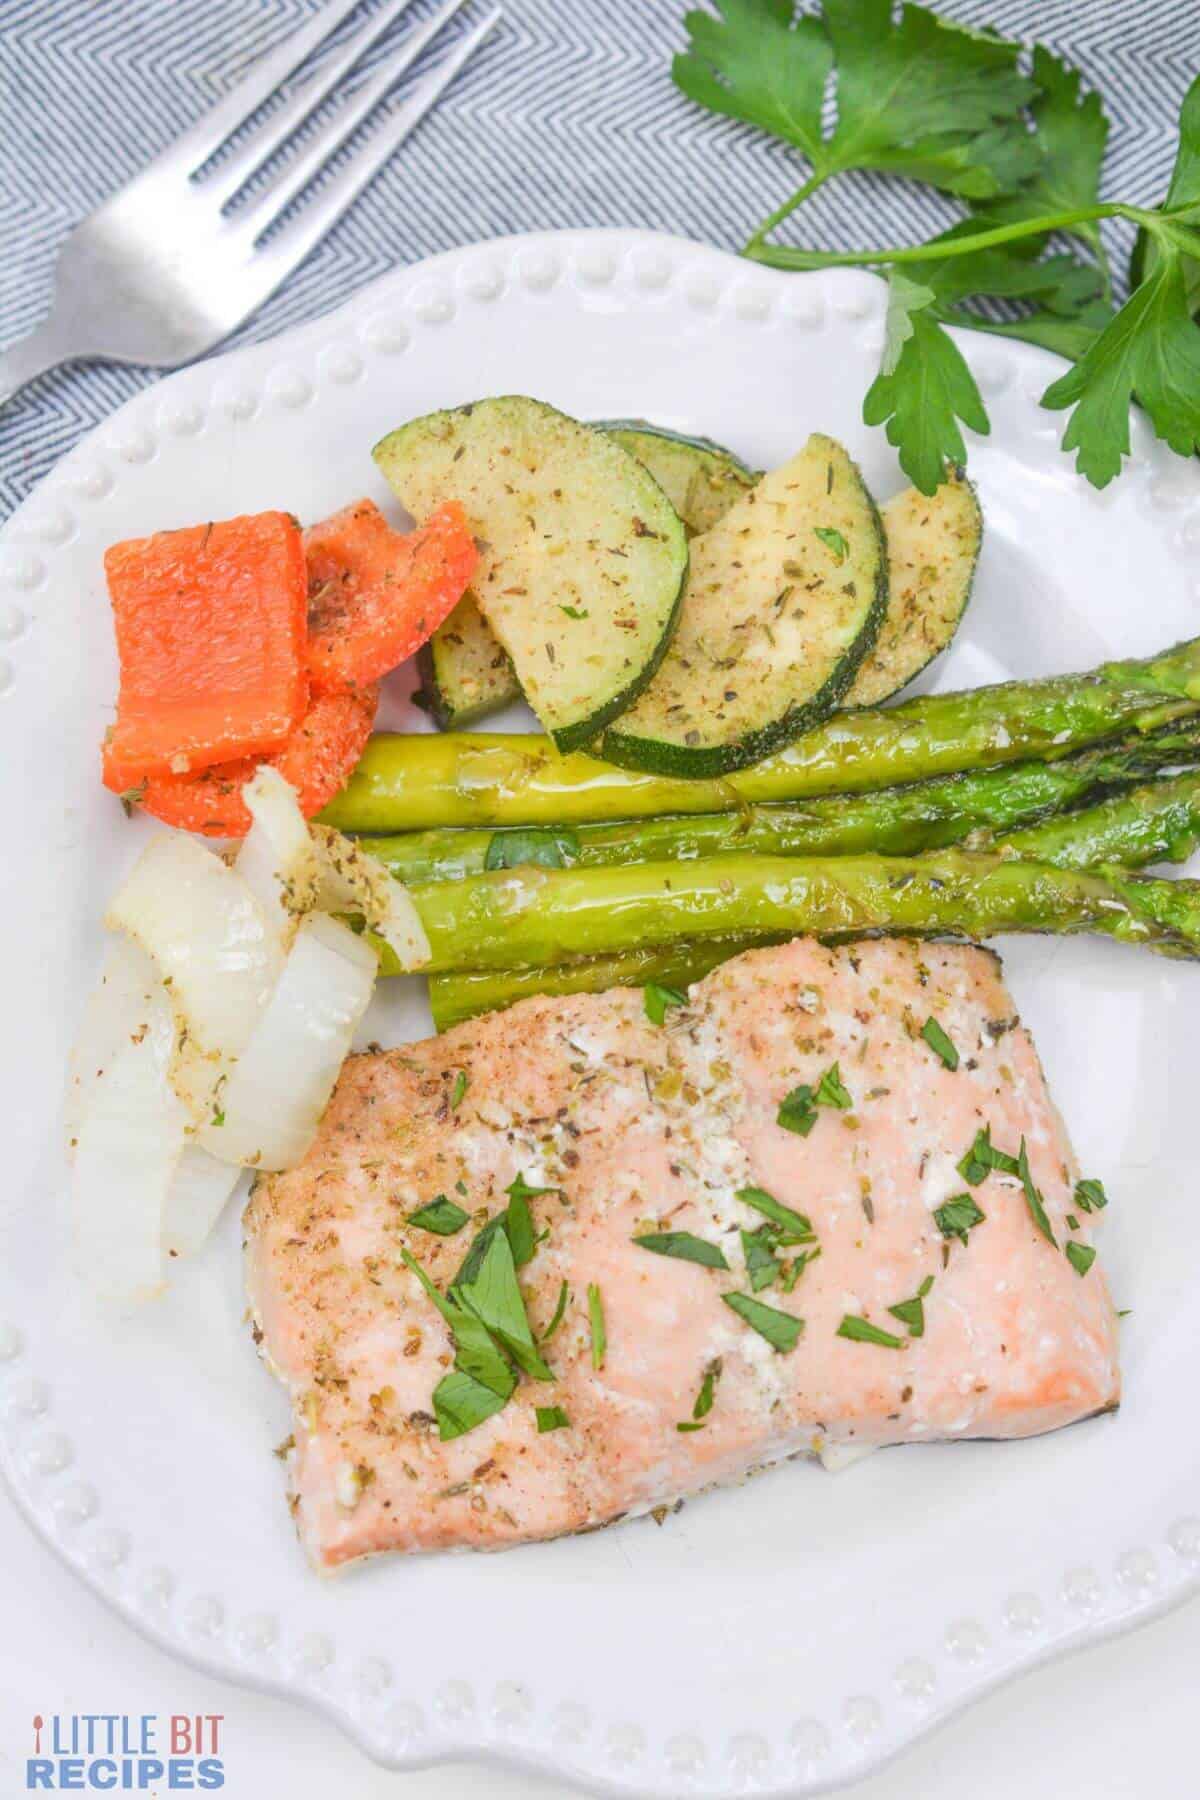 salmon and vegetables on plate.